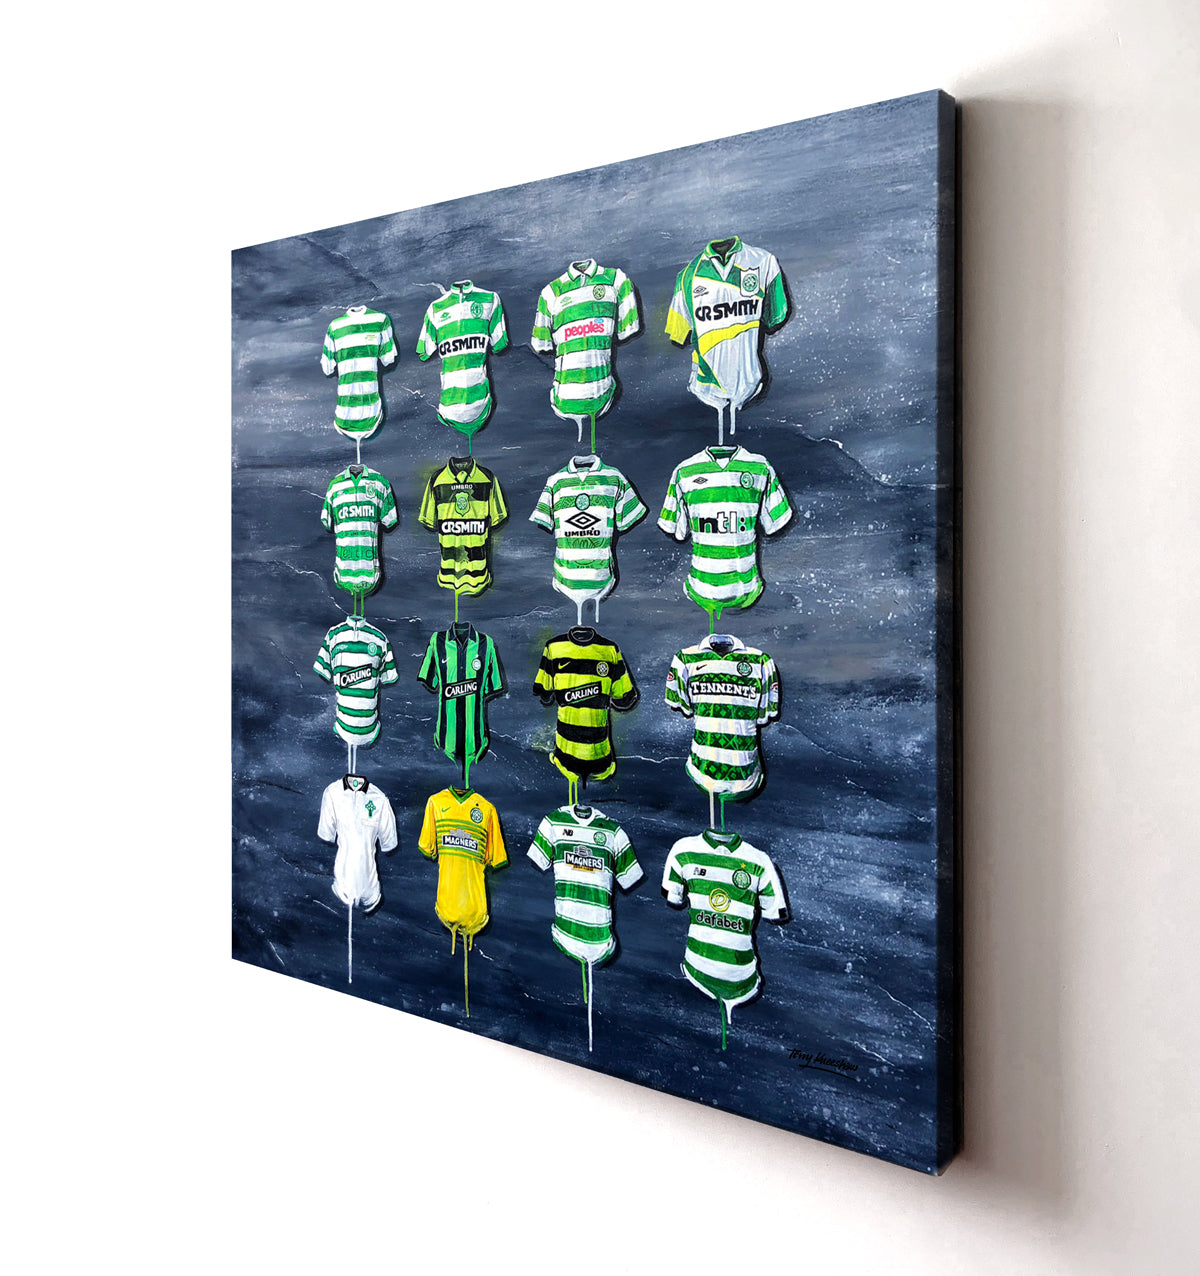 Celtic Canvases by Terry Kneeshaw come in various sizes, including 20x20, 30x30, and 40x40. Each canvas is available in either a framed or unframed black floating frame. The artwork features a captivating abstract composition with bold colors and textures that pay tribute to the legendary Celtic team. Perfect for any Celtic fan or football enthusiast, these canvases are a great addition to any room and are sure to impress with their unique style and energy.